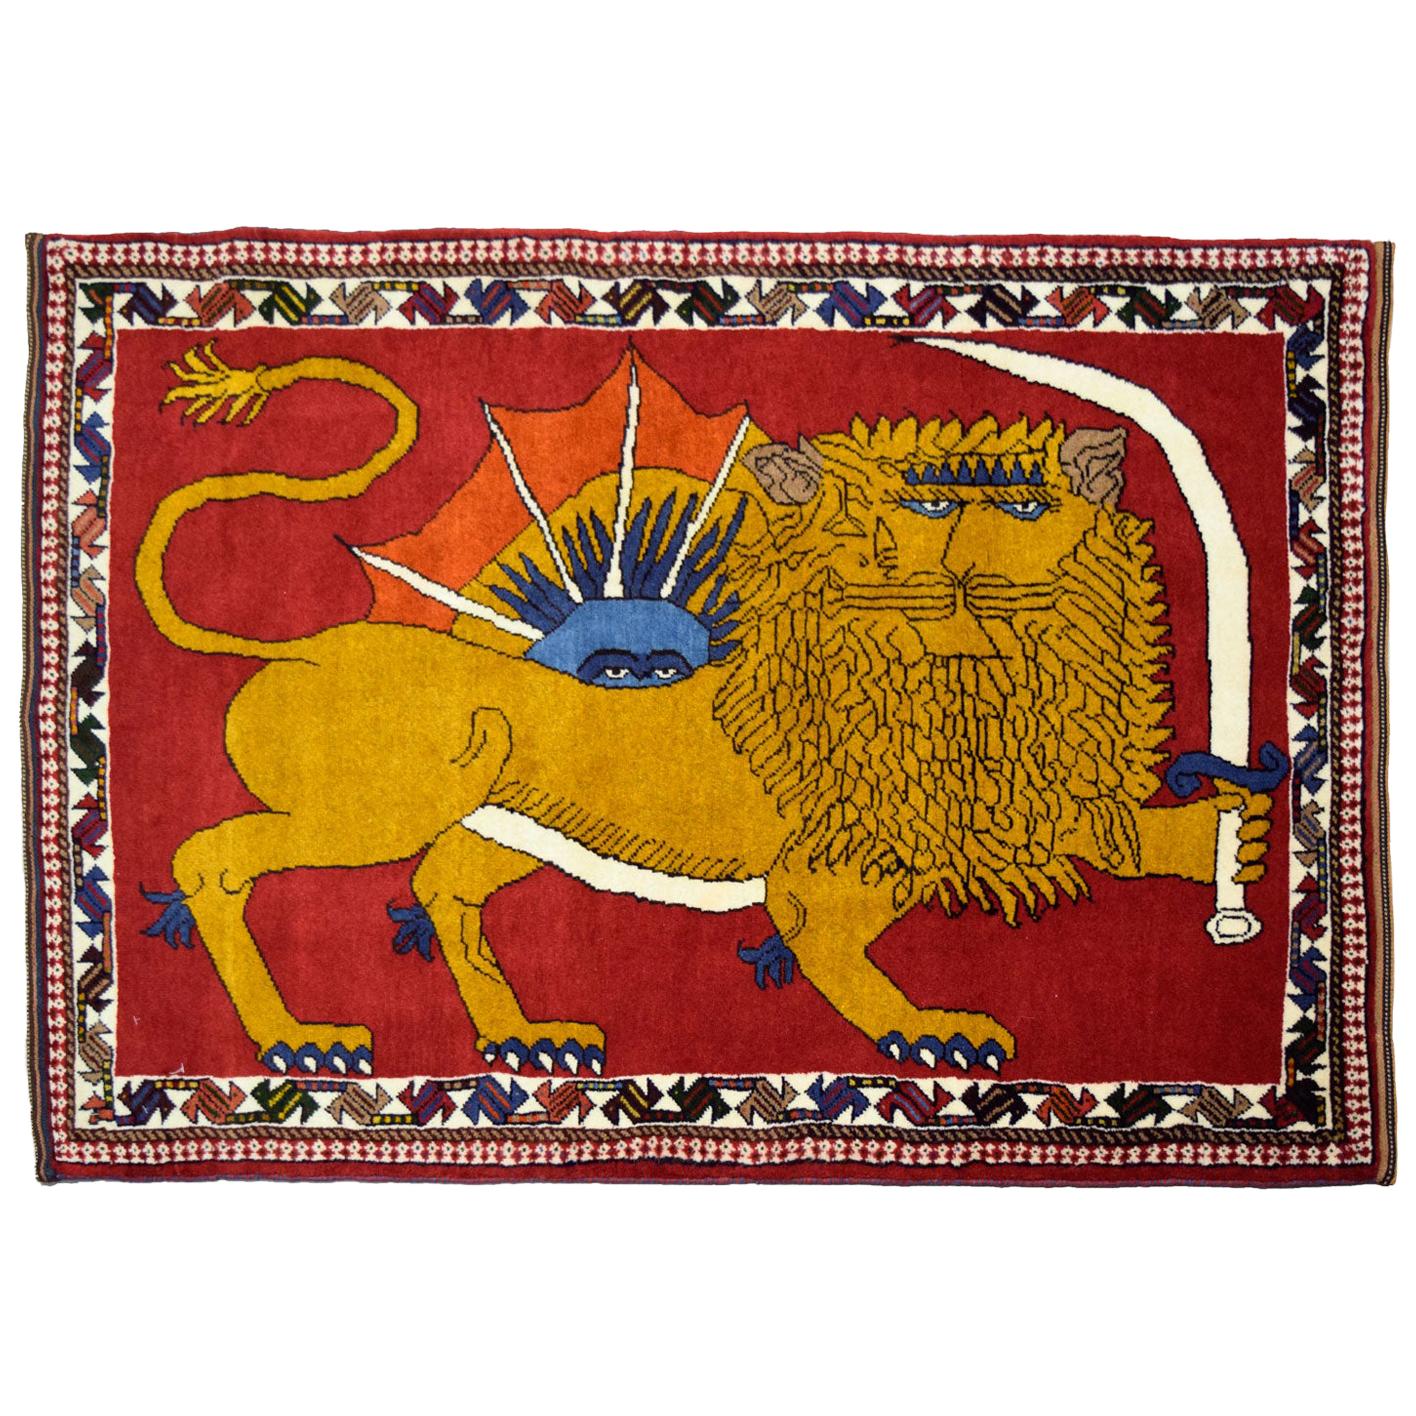 Distinctive Majestic Persian Lion with Sword Rug in Gold, Red, and Blue